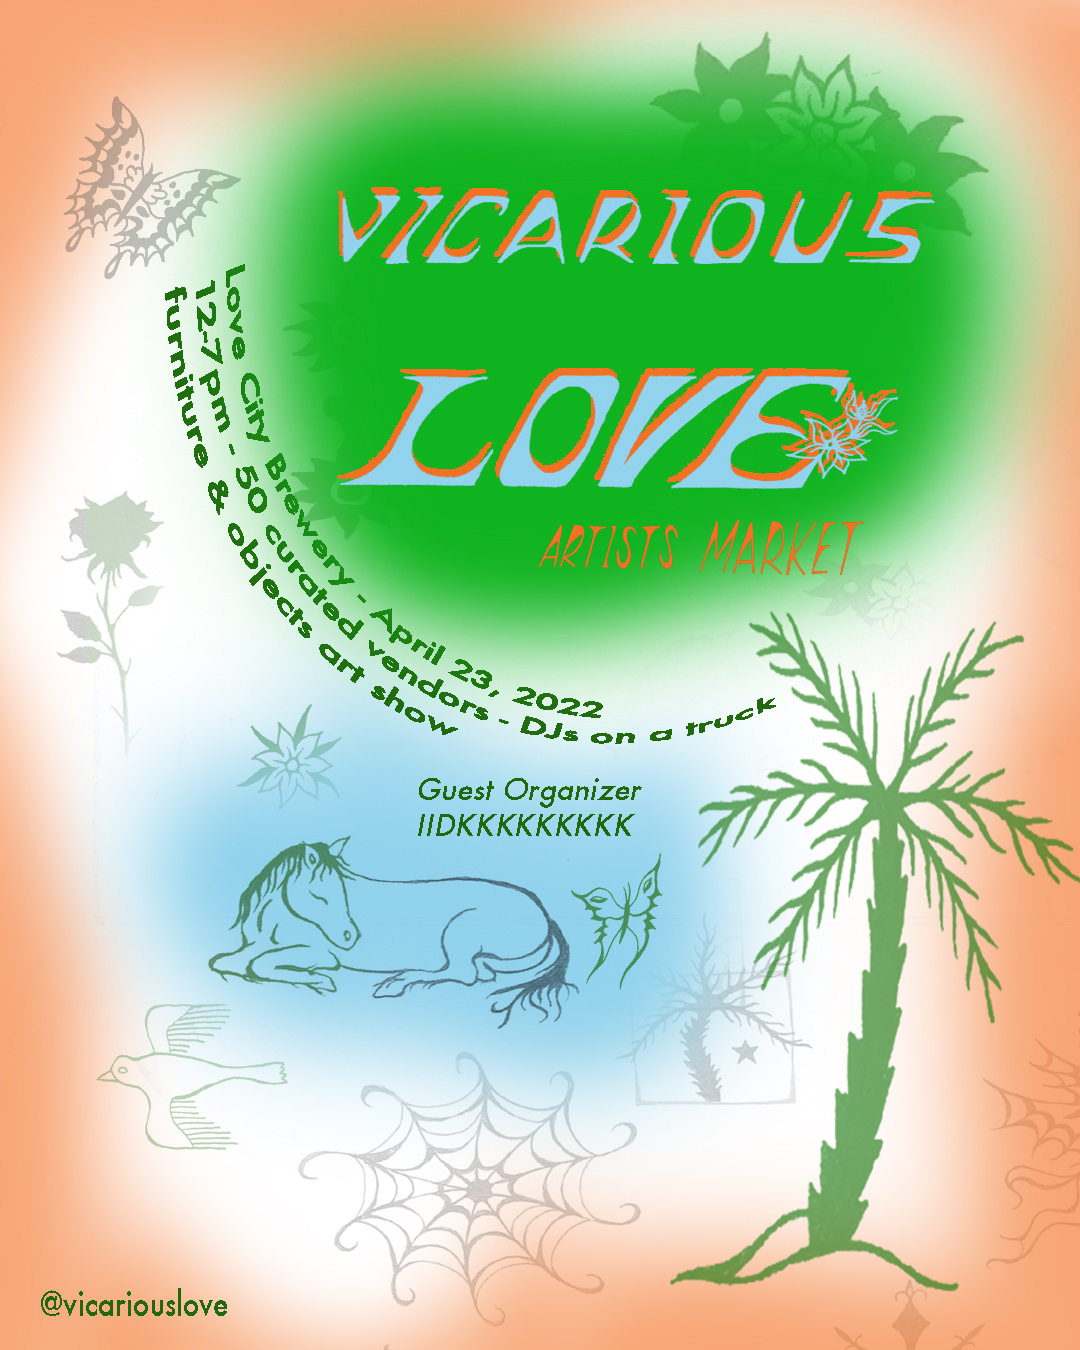 Flyer with illustations of a butterfly, flower, palm tree, sleeping horse, flowers, a bird flying, and a spiderweb. The text reads as follows: Vicarious Love Artists Market / Love City Brewery - April 23, 2022 / 12-7 pm - 50 curated vendors - DJs on a truck - furniture & objects art show / Guest Organizer IIDKKKKKKKKK / @vicariouslove